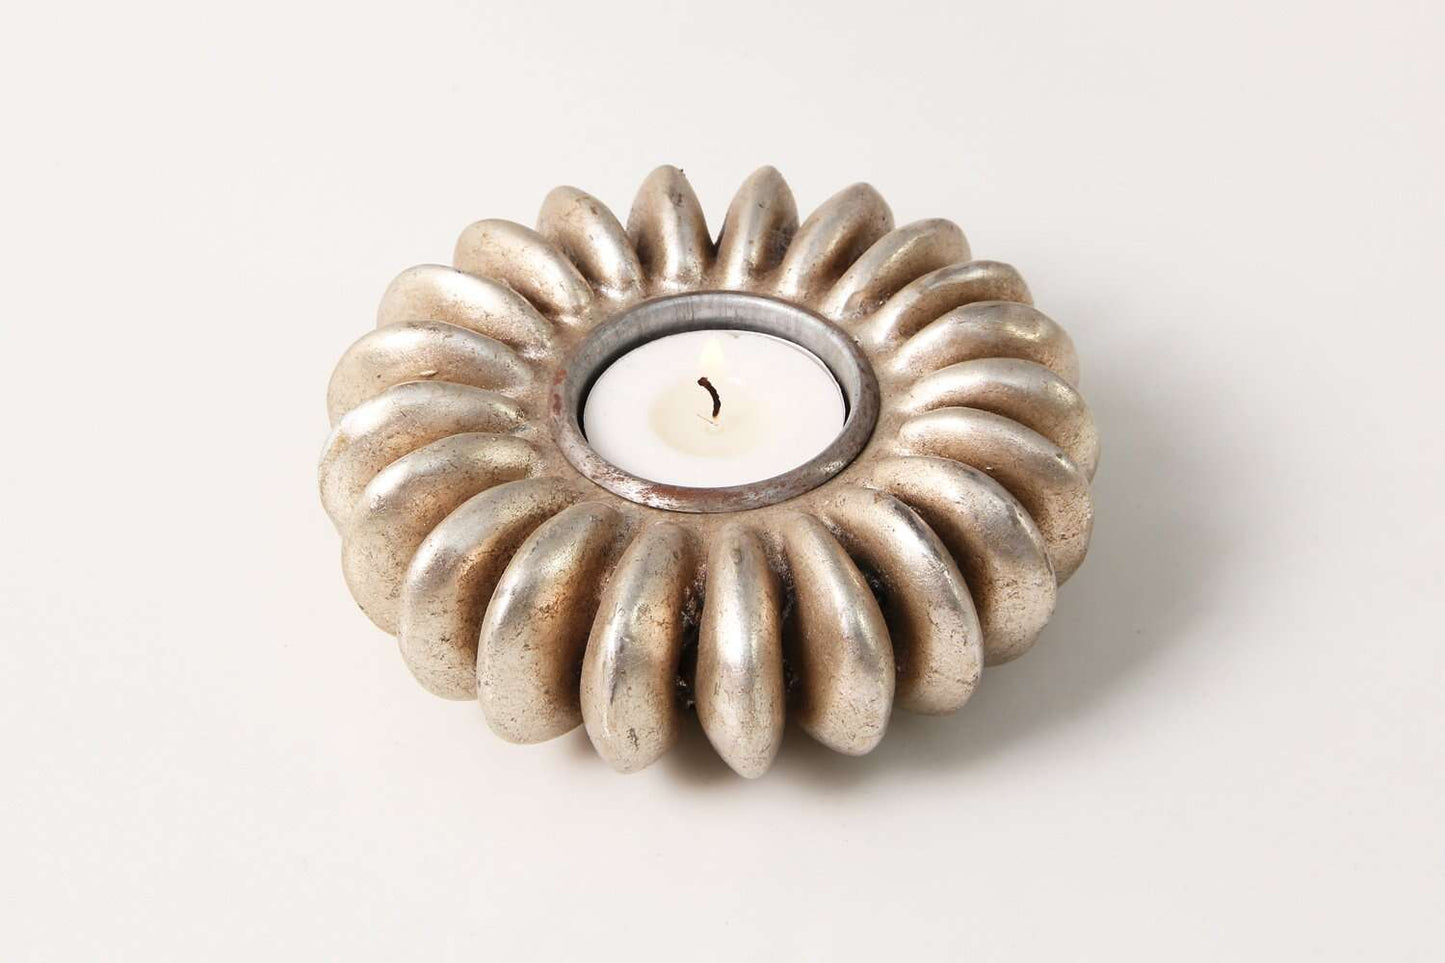 Seed Tea Light Holders in Antique Silver